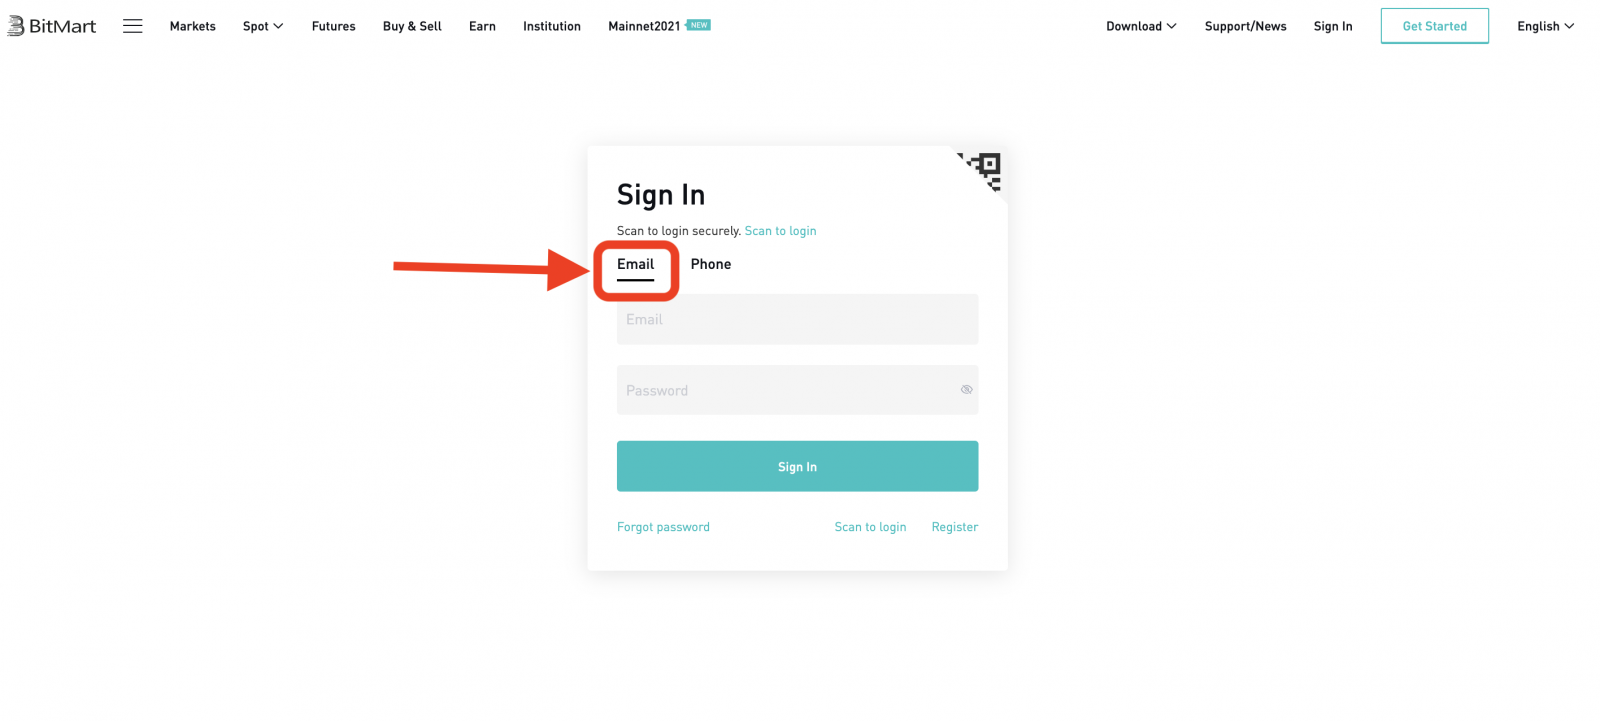 How to Login and Verify Account in BitMart